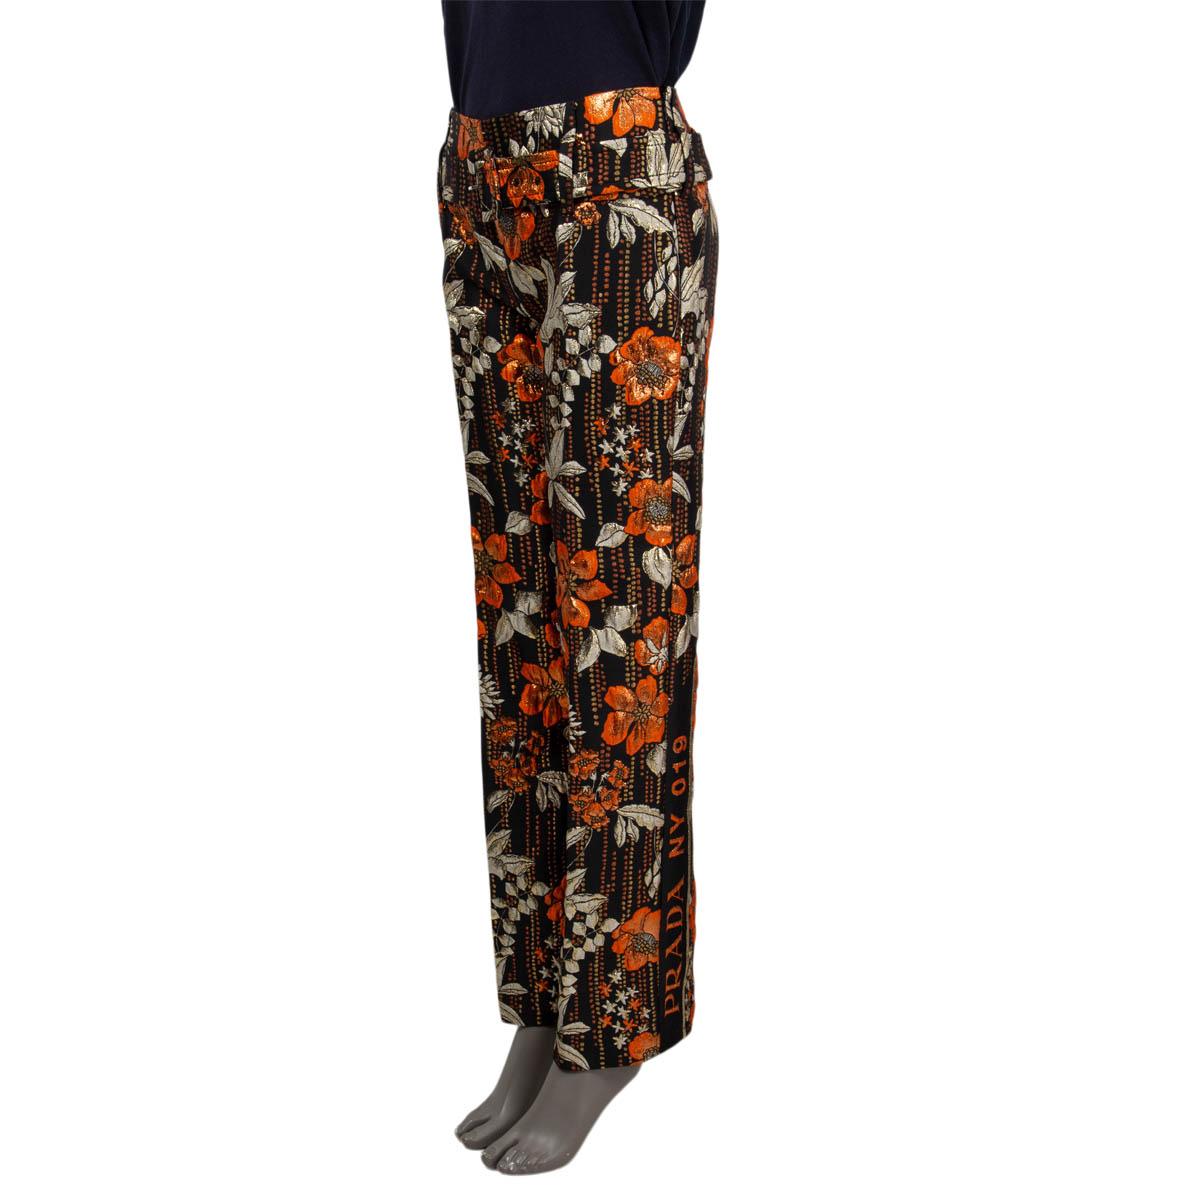 100% authentic Prada floral-cloqué wide-leg pants in orange and black polyester(59%), acetate  (25%), silk (10%) and polyamide (6%). Features belted and brocade, on the side Prada lettering. Closes with a concealed zipper. Has been worn and is in